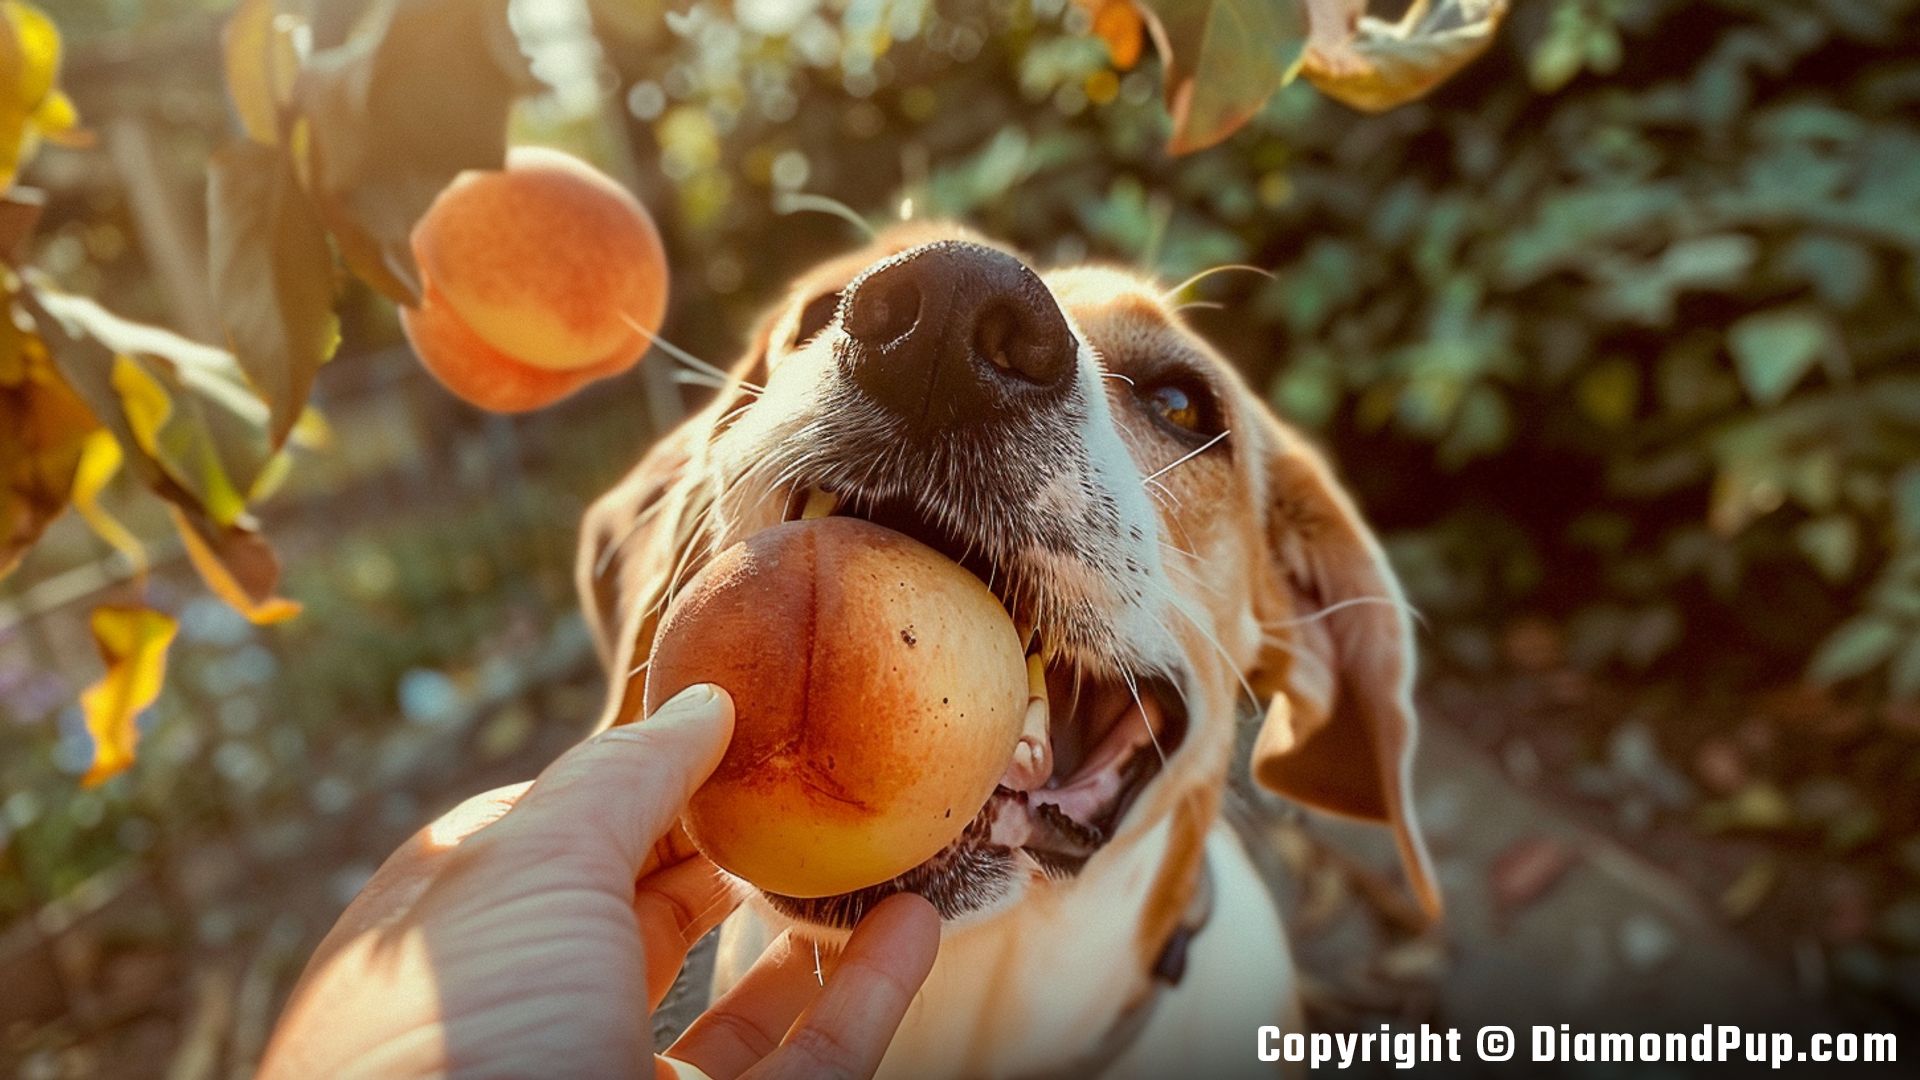 Image of an Adorable Beagle Snacking on Peaches